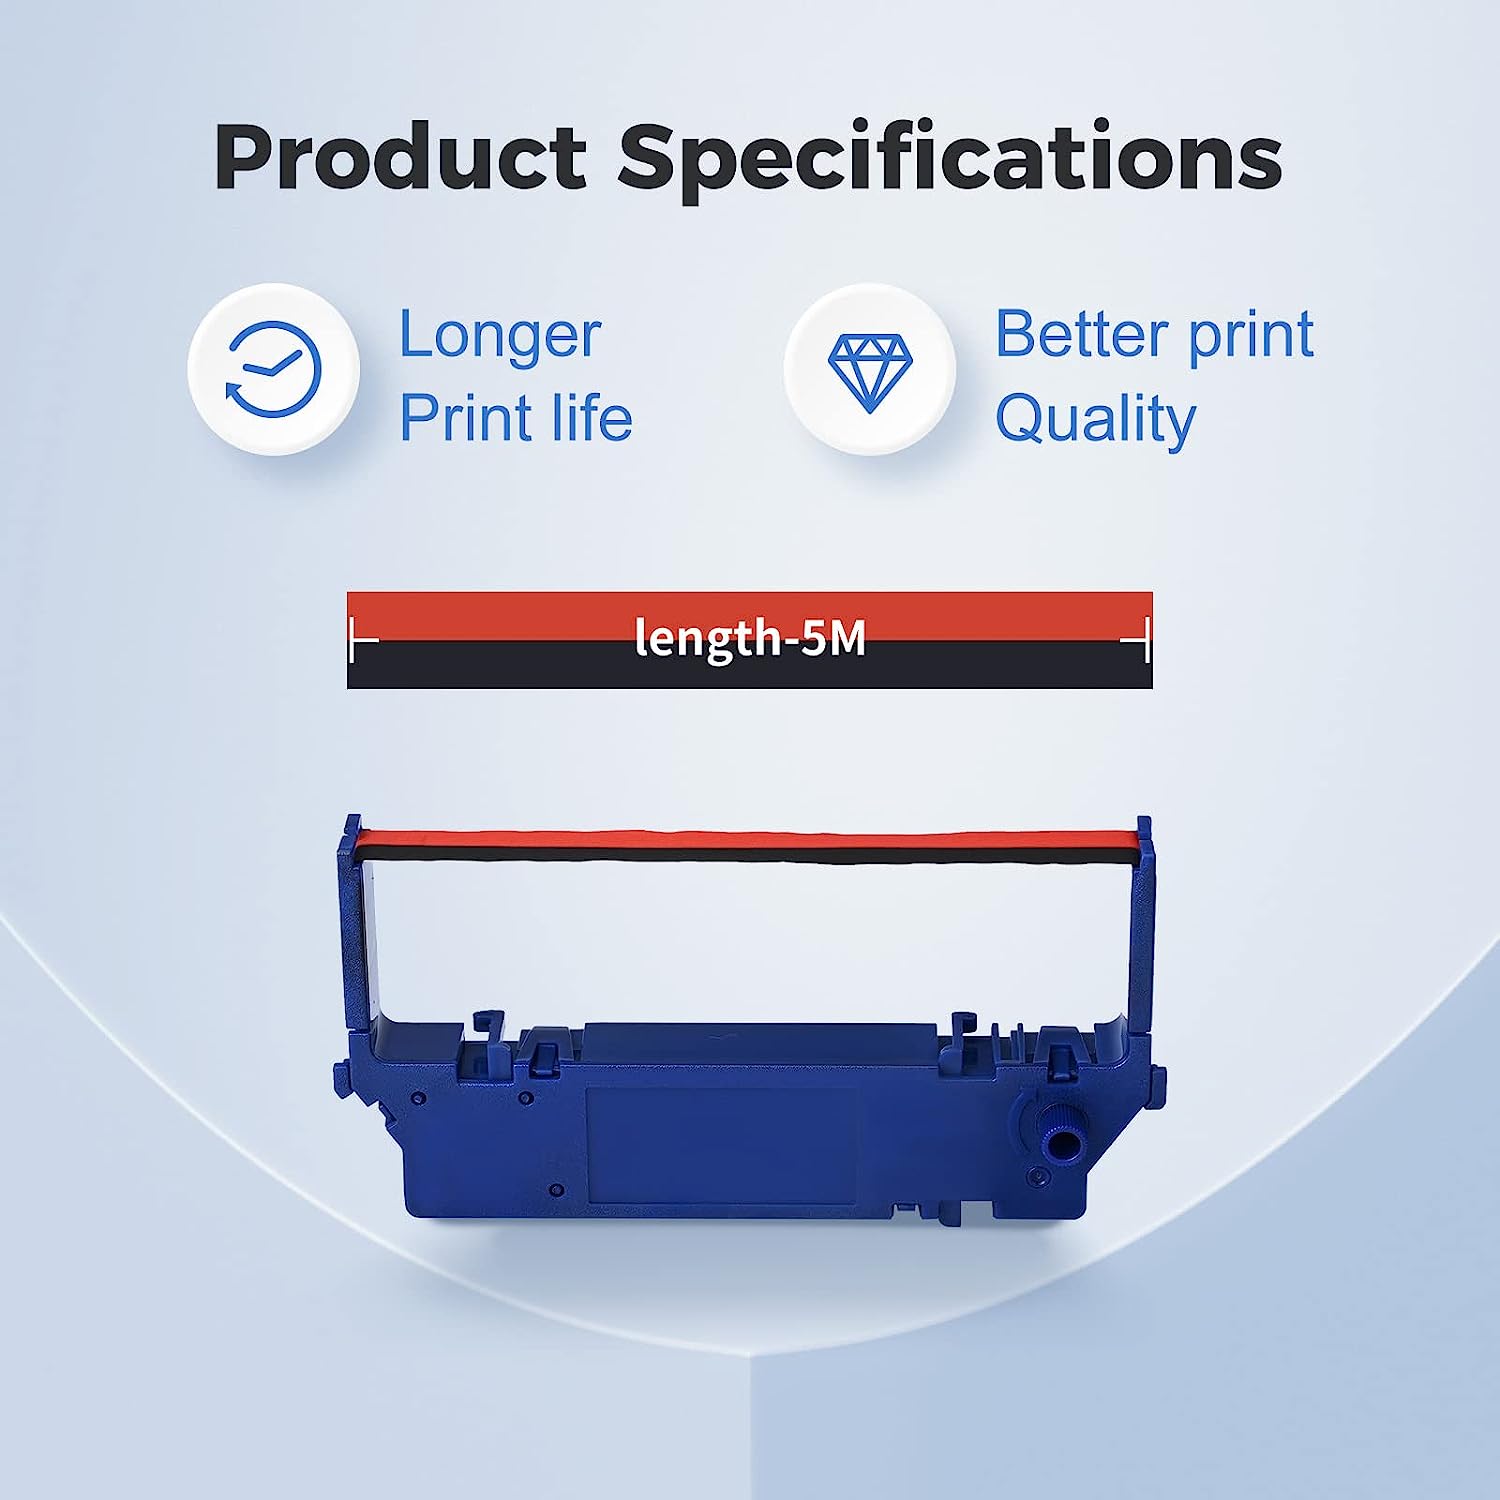 Product Specifications Longer Print life Better print Quality